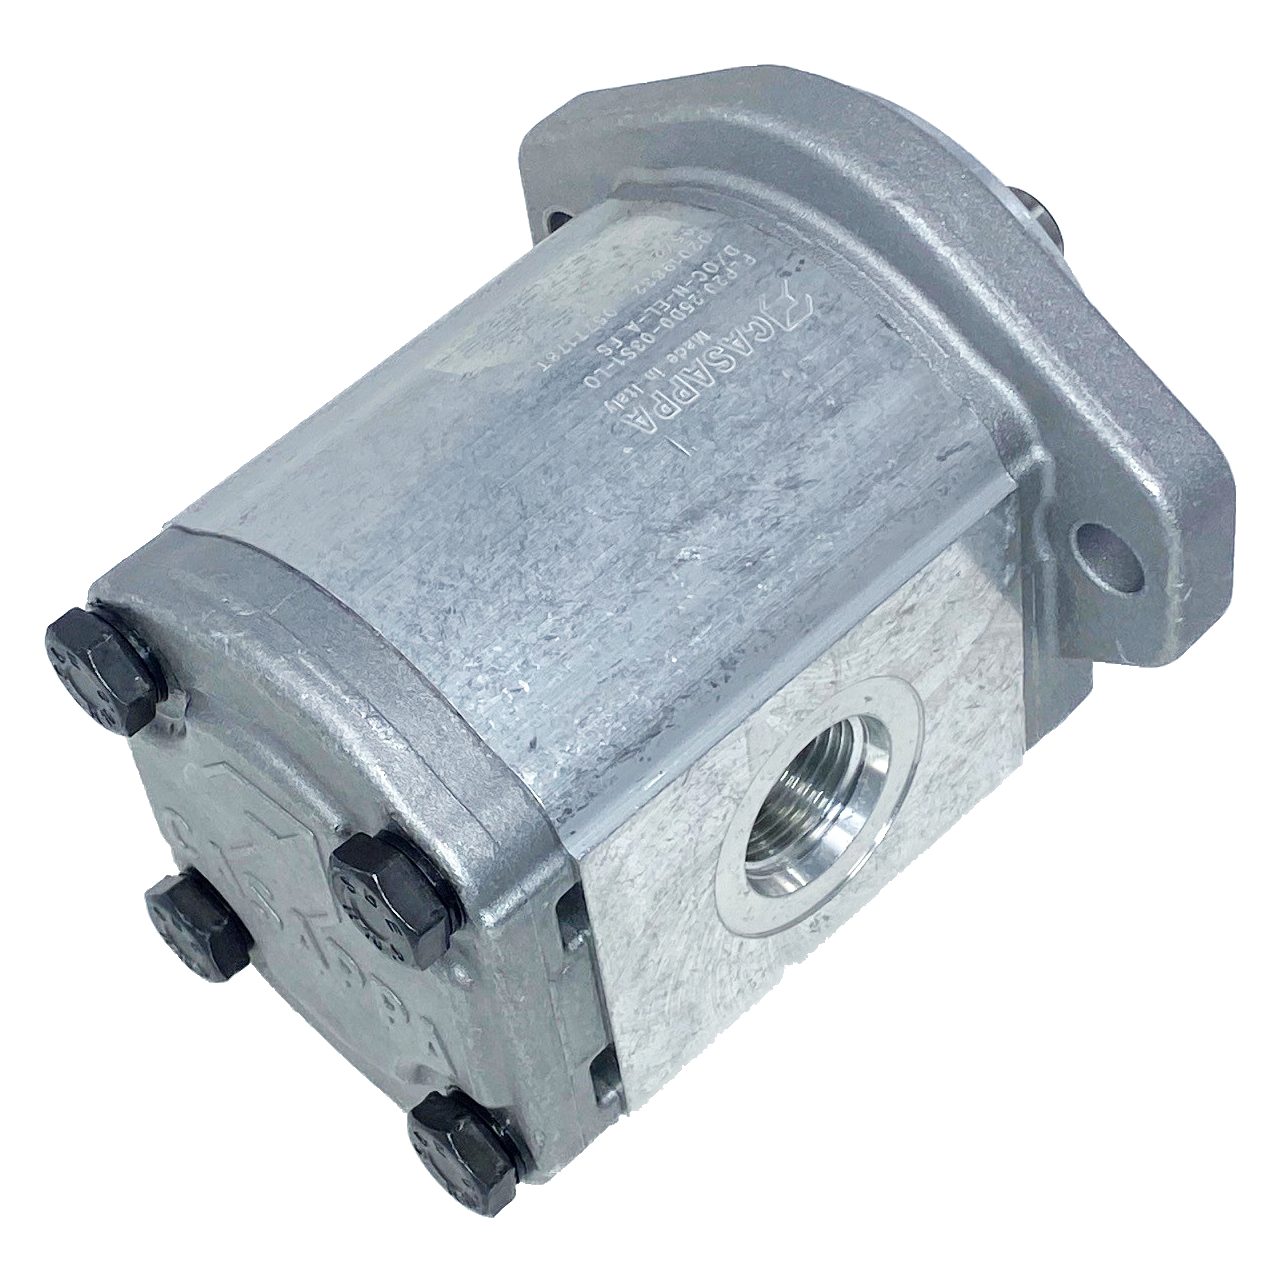 PHP20.27,8S0-31S9-LOG/OC-N-EL : Casappa Polaris Gear Pump, 28.21cc, 2900psi Rated, 2500RPM, CCW, 5/8" Bore x 5/32" Key Shaft, SAE A 2-Bolt Flange, 1.25" #20 SAE Inlet, 0.625 (5/8") #10 SAE Outlet, Cast Iron Body, Aluminum Flange